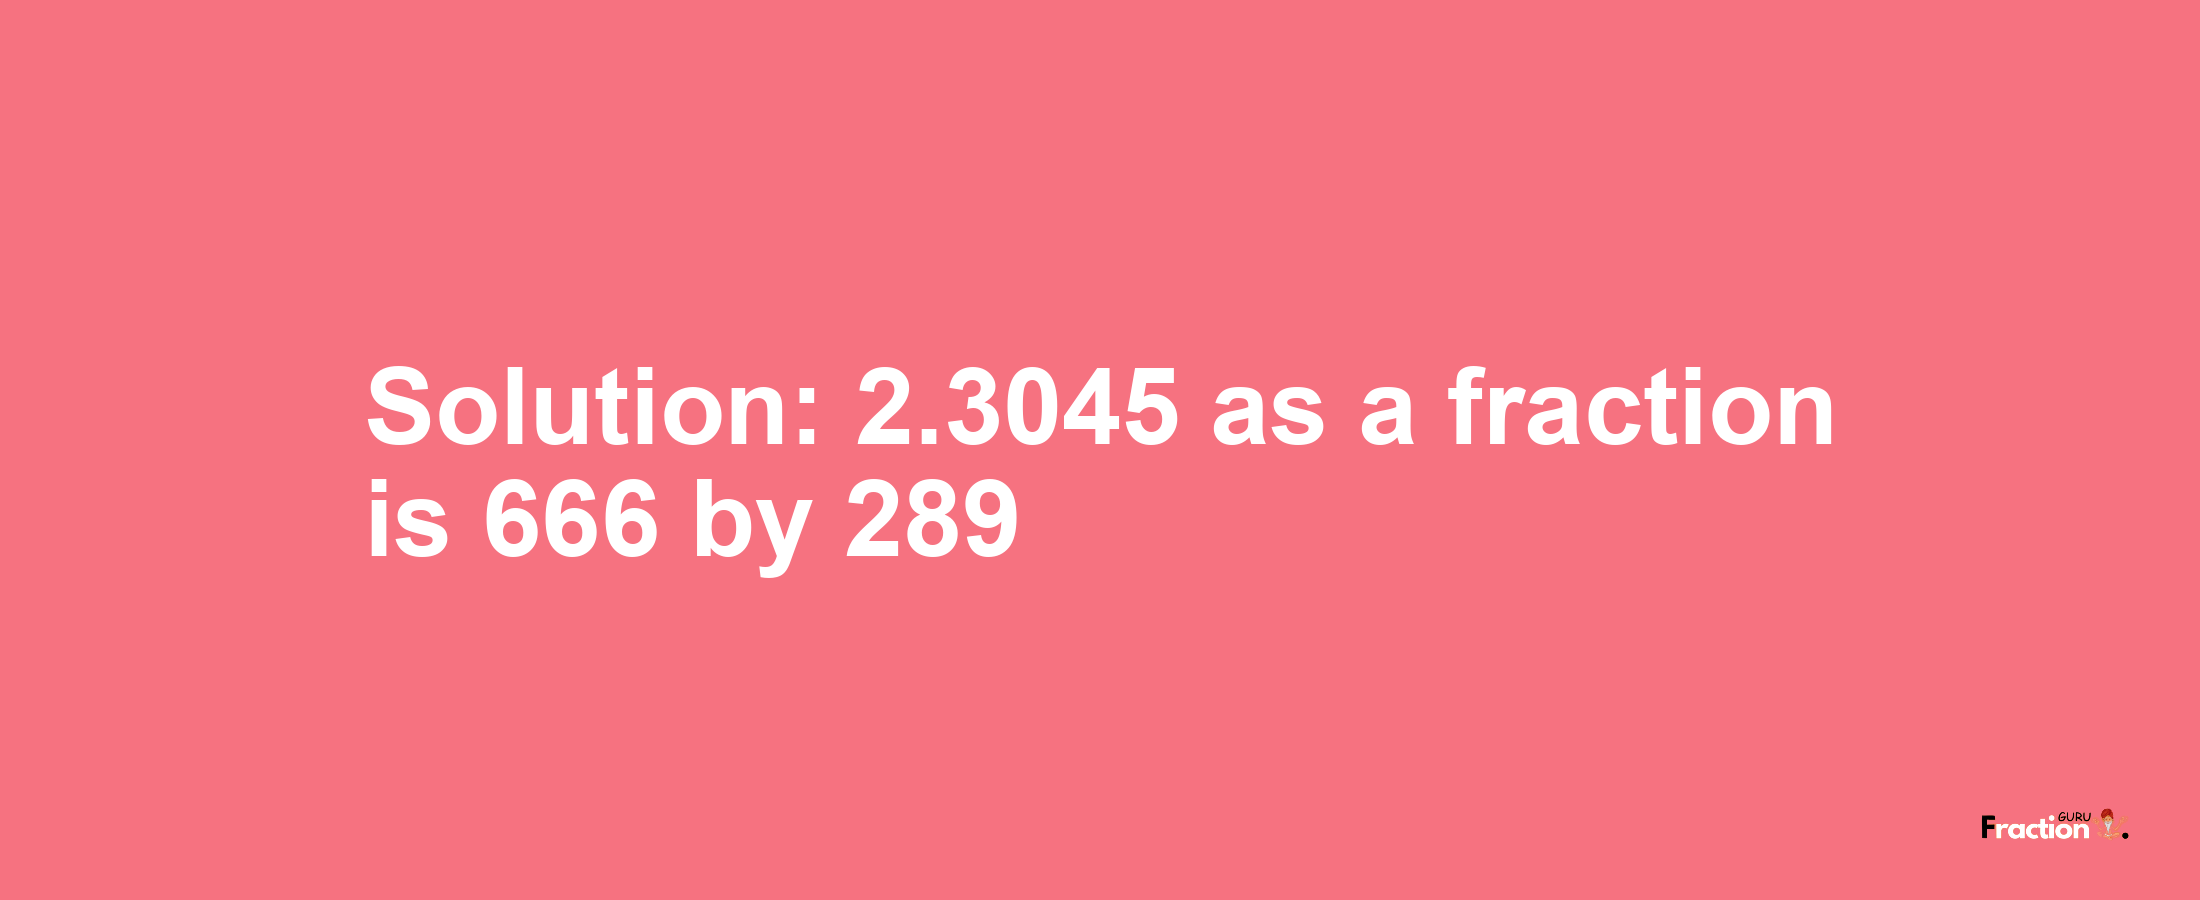 Solution:2.3045 as a fraction is 666/289